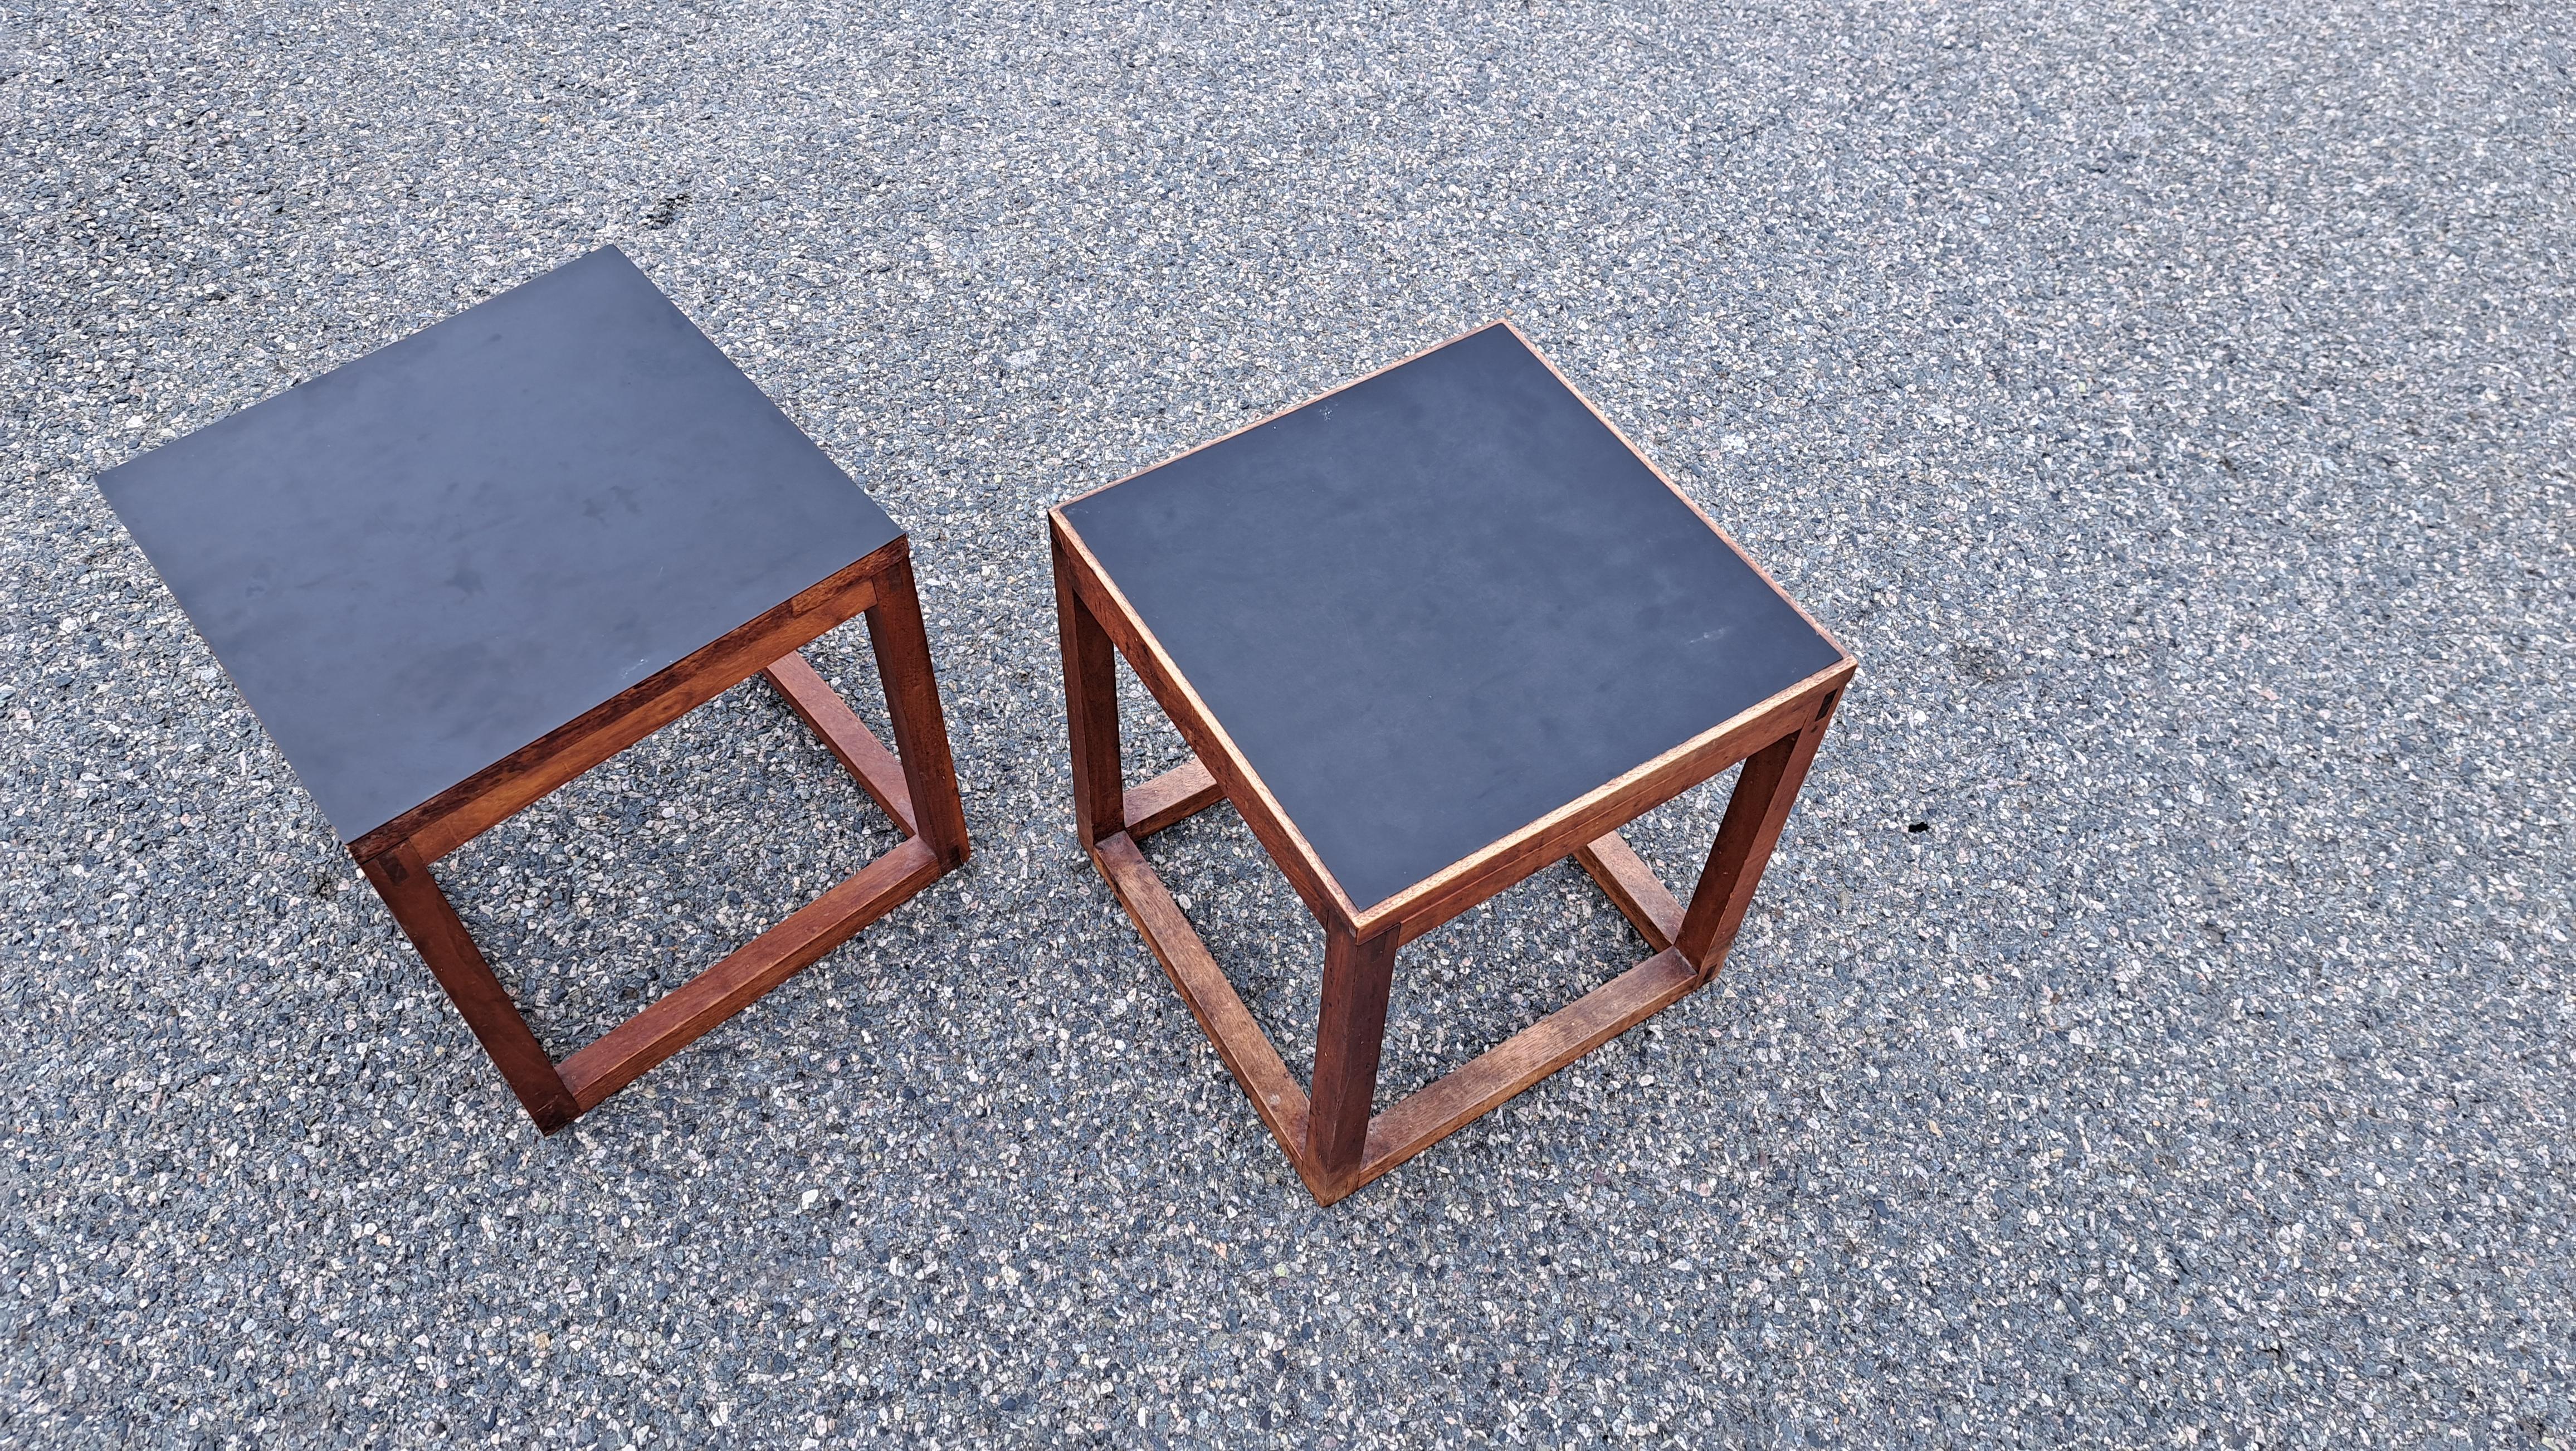 Pair of Kai Kristiansen style wooden cube side tables with black formica tops. Sturdy hand crafted tables with strong wood joints.